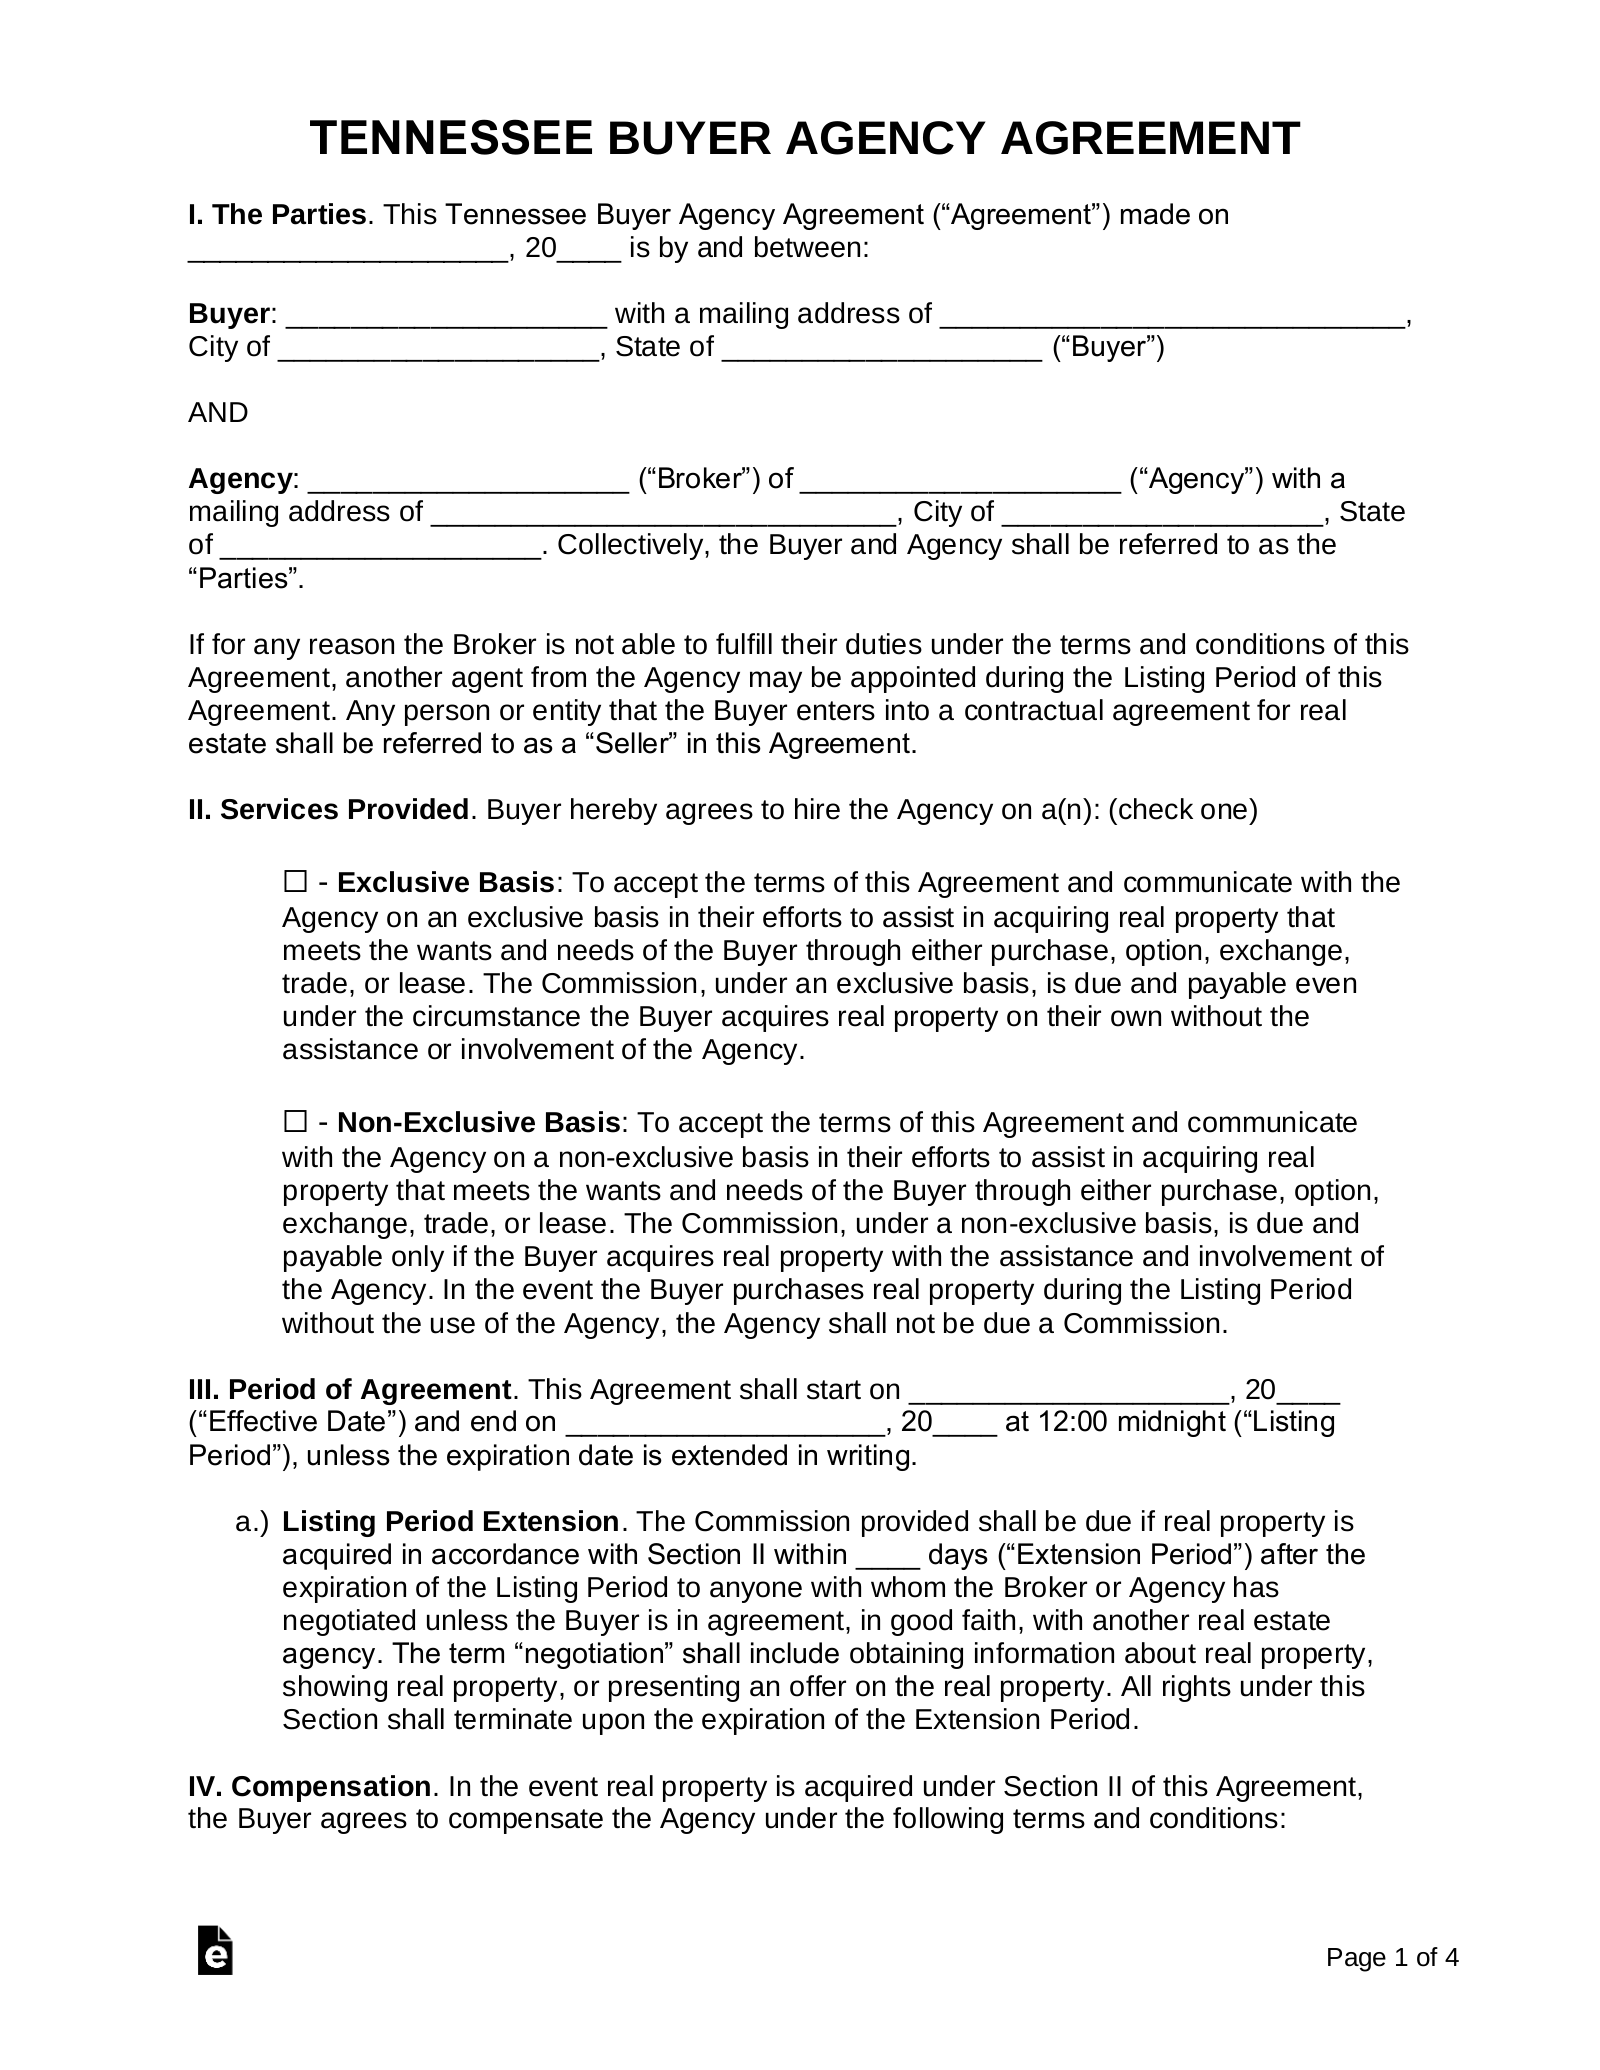 Tennessee Buyer Agency Agreement